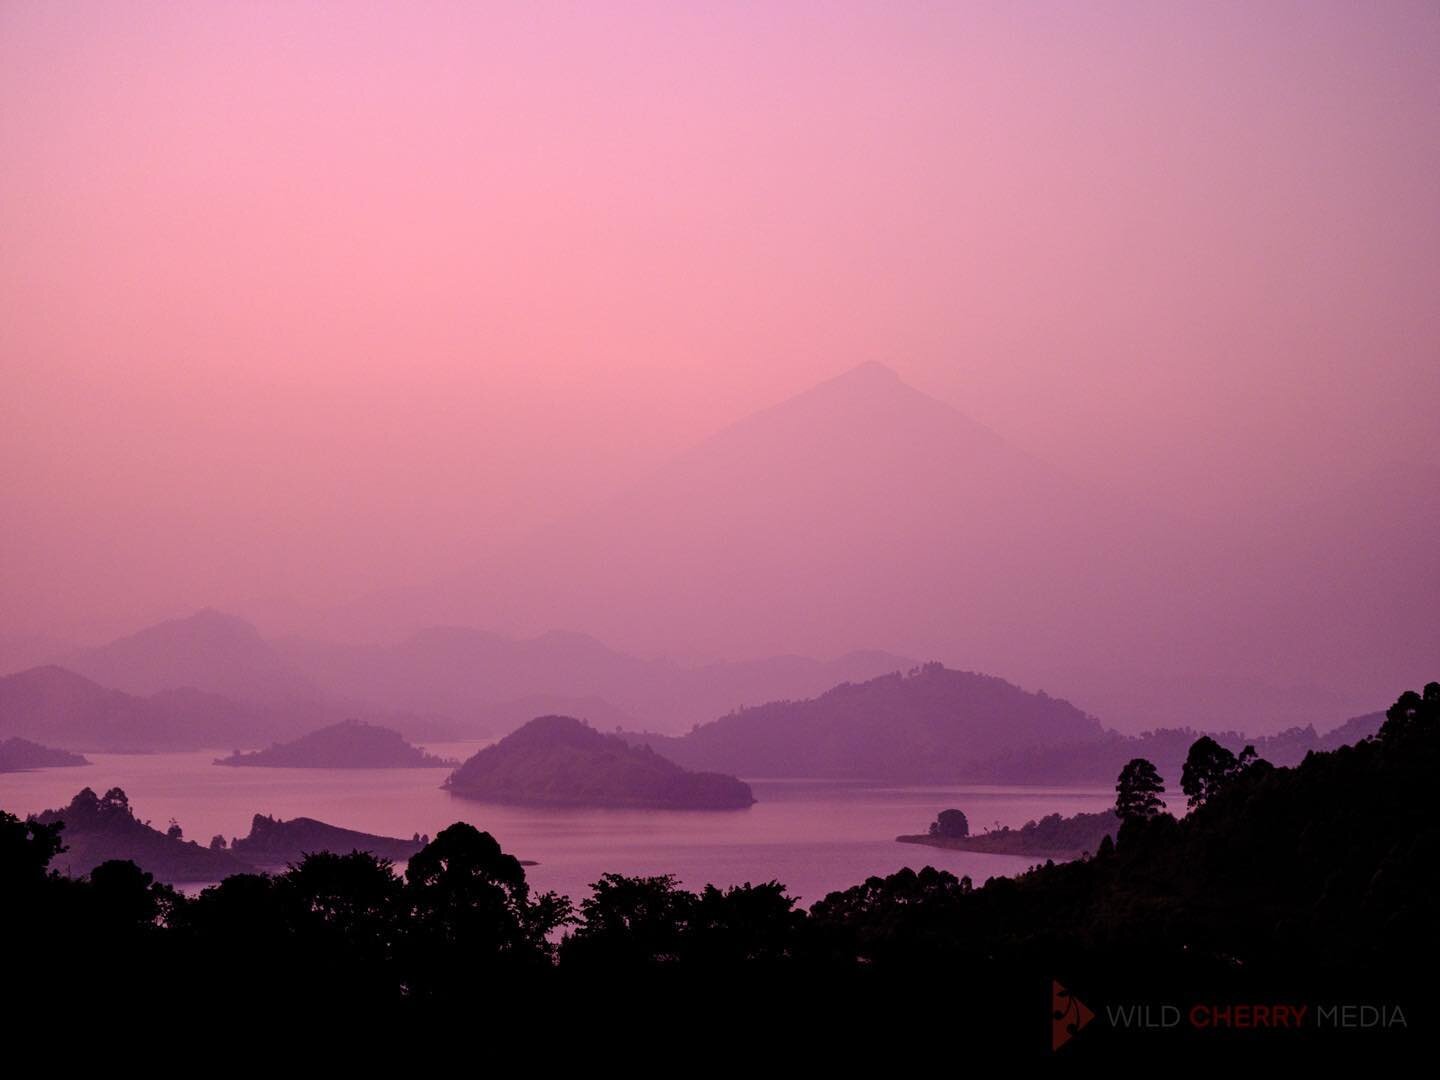 Lake Mutanda at 6.30am on route to Bwindi national park in Uganda. A mystical predawn atmosphere. Helped disguise a truly mad road to drive ahead of a special experience trekking with mountain gorillas. 

Taken with the @fujifilmuk #gfx100s 

This im